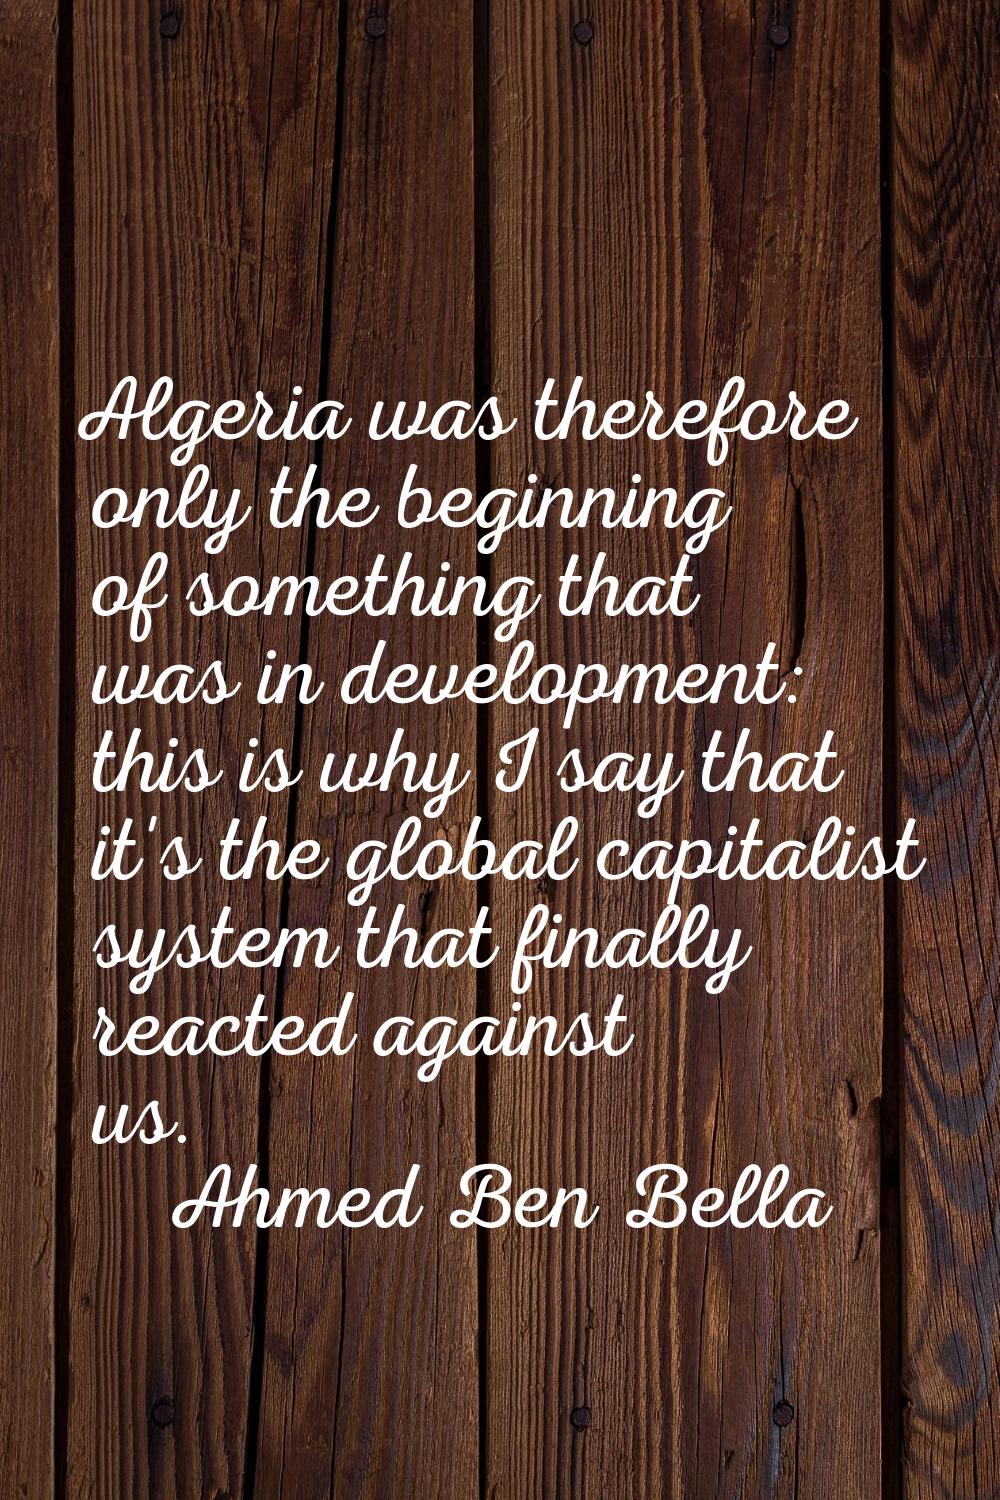 Algeria was therefore only the beginning of something that was in development: this is why I say th